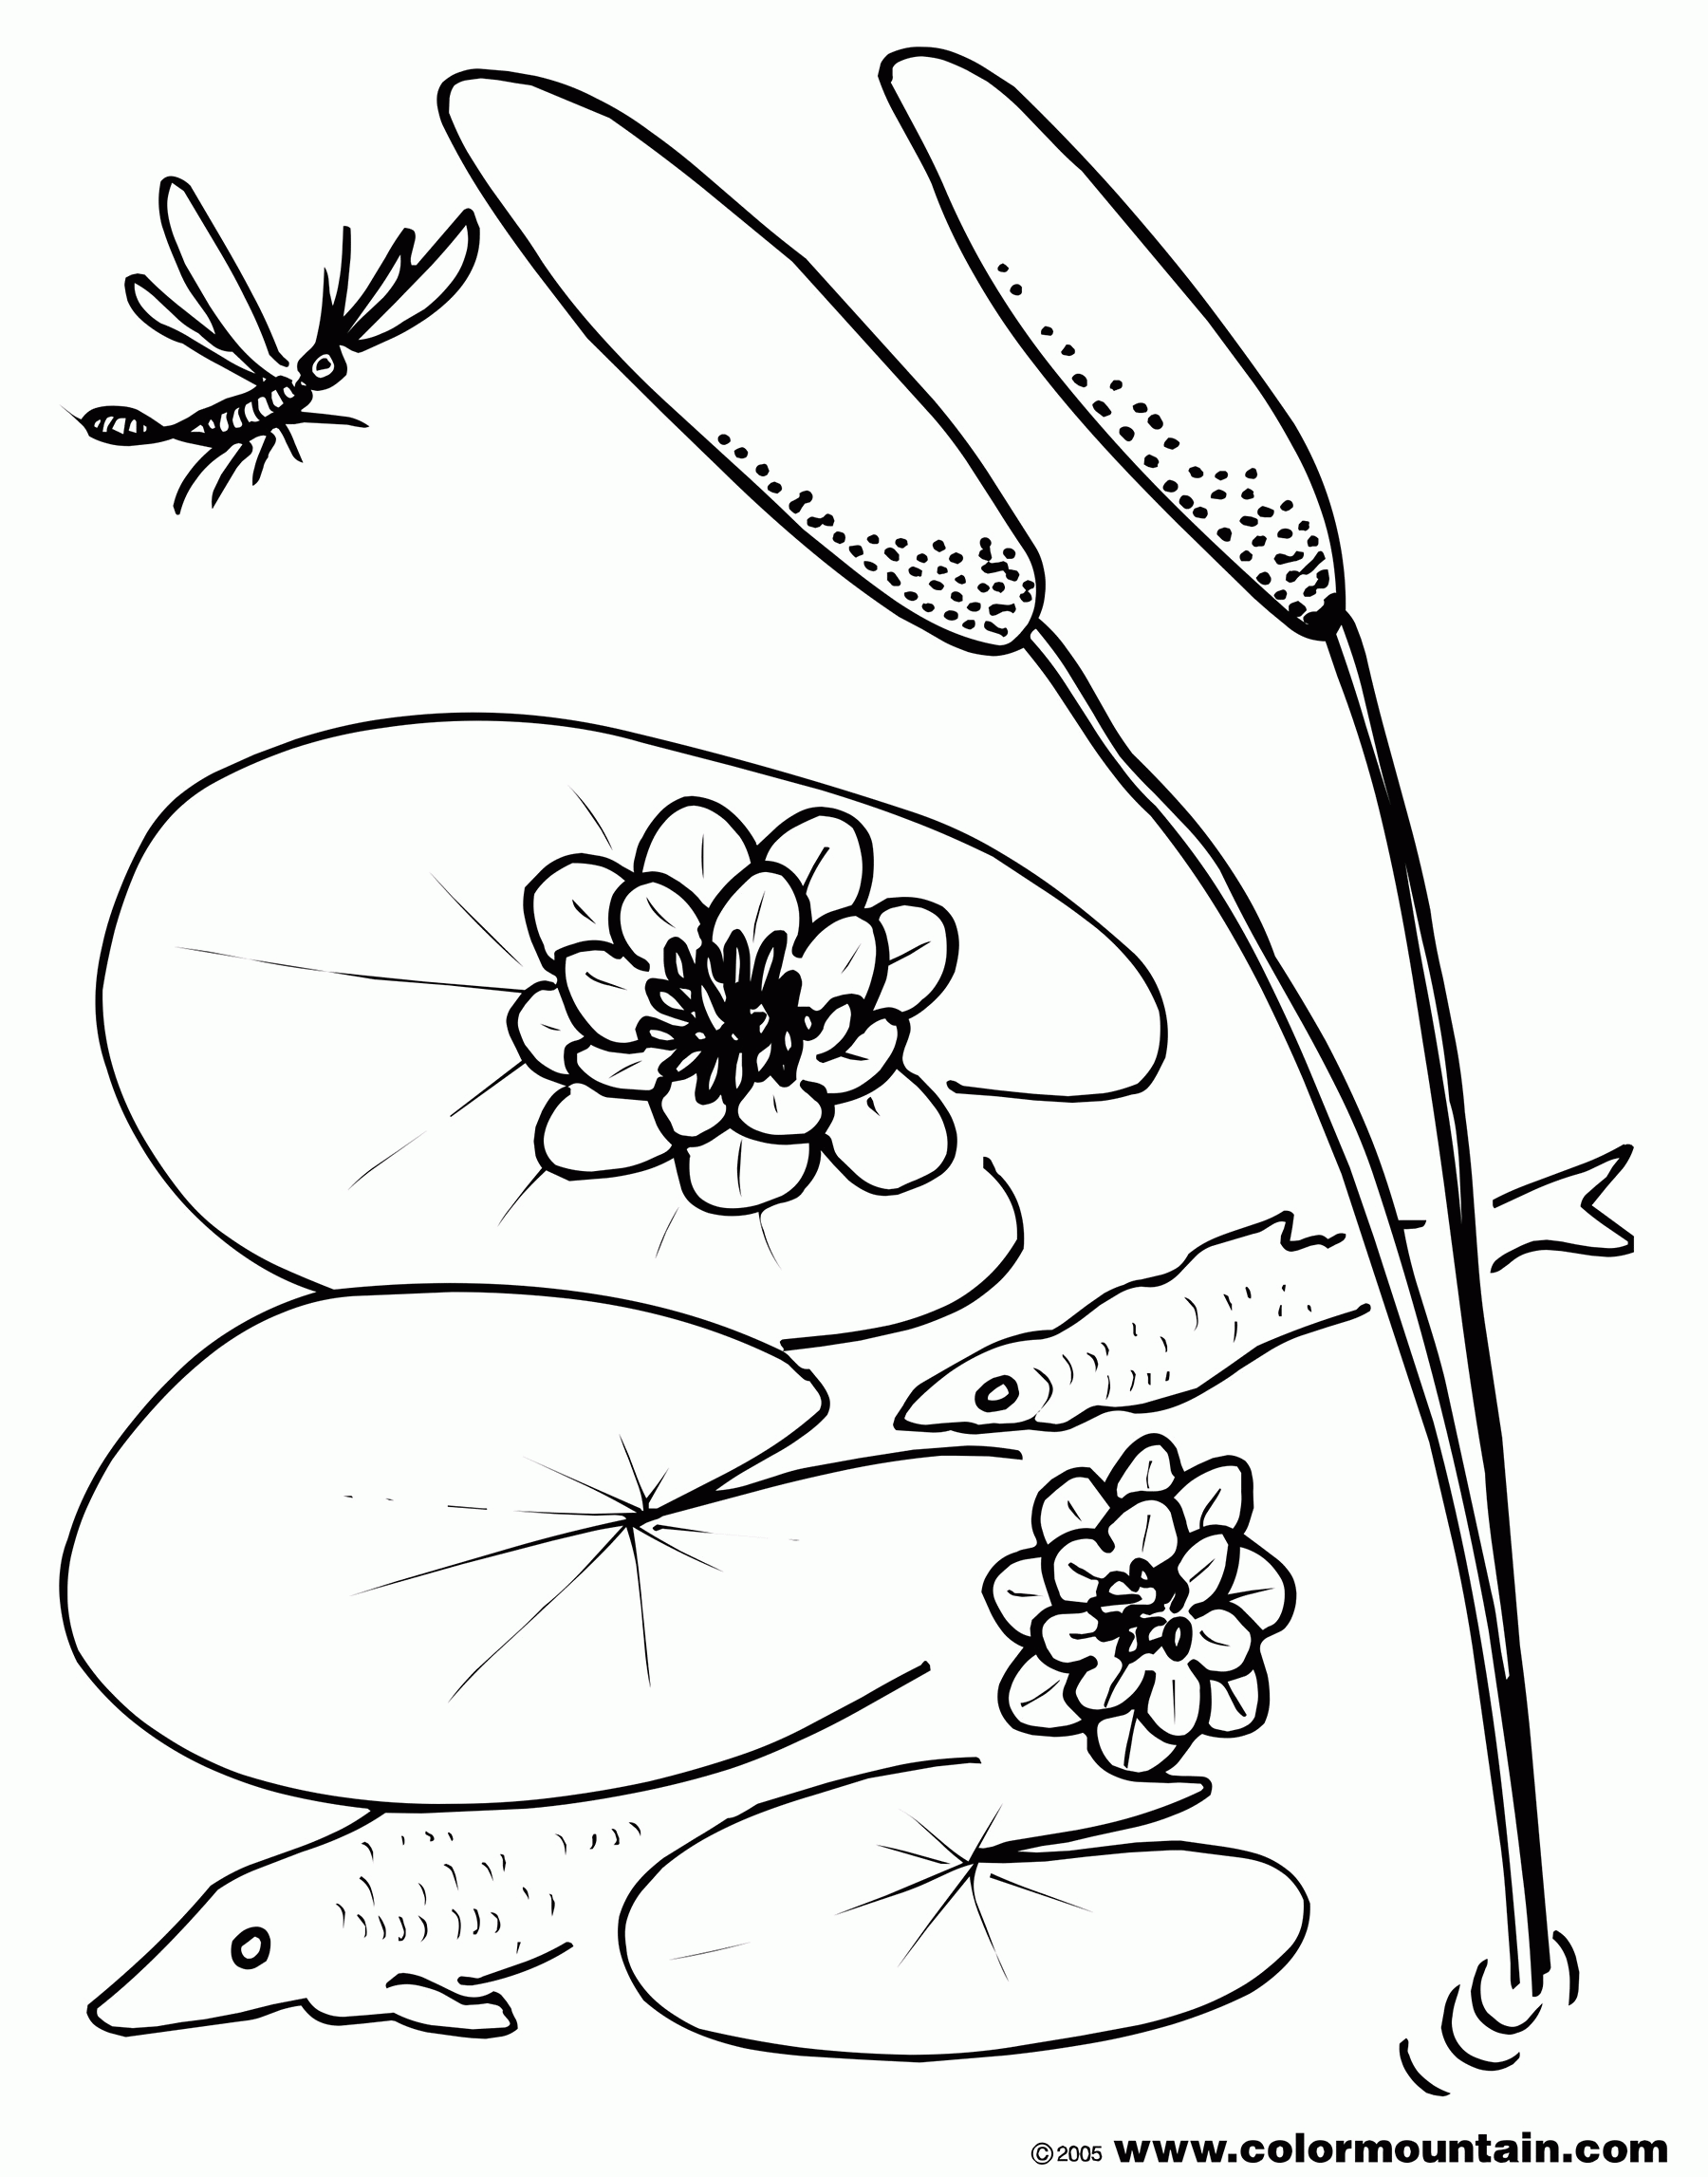 Lily Pad Coloring Sheet - Create A Printout Or Activity